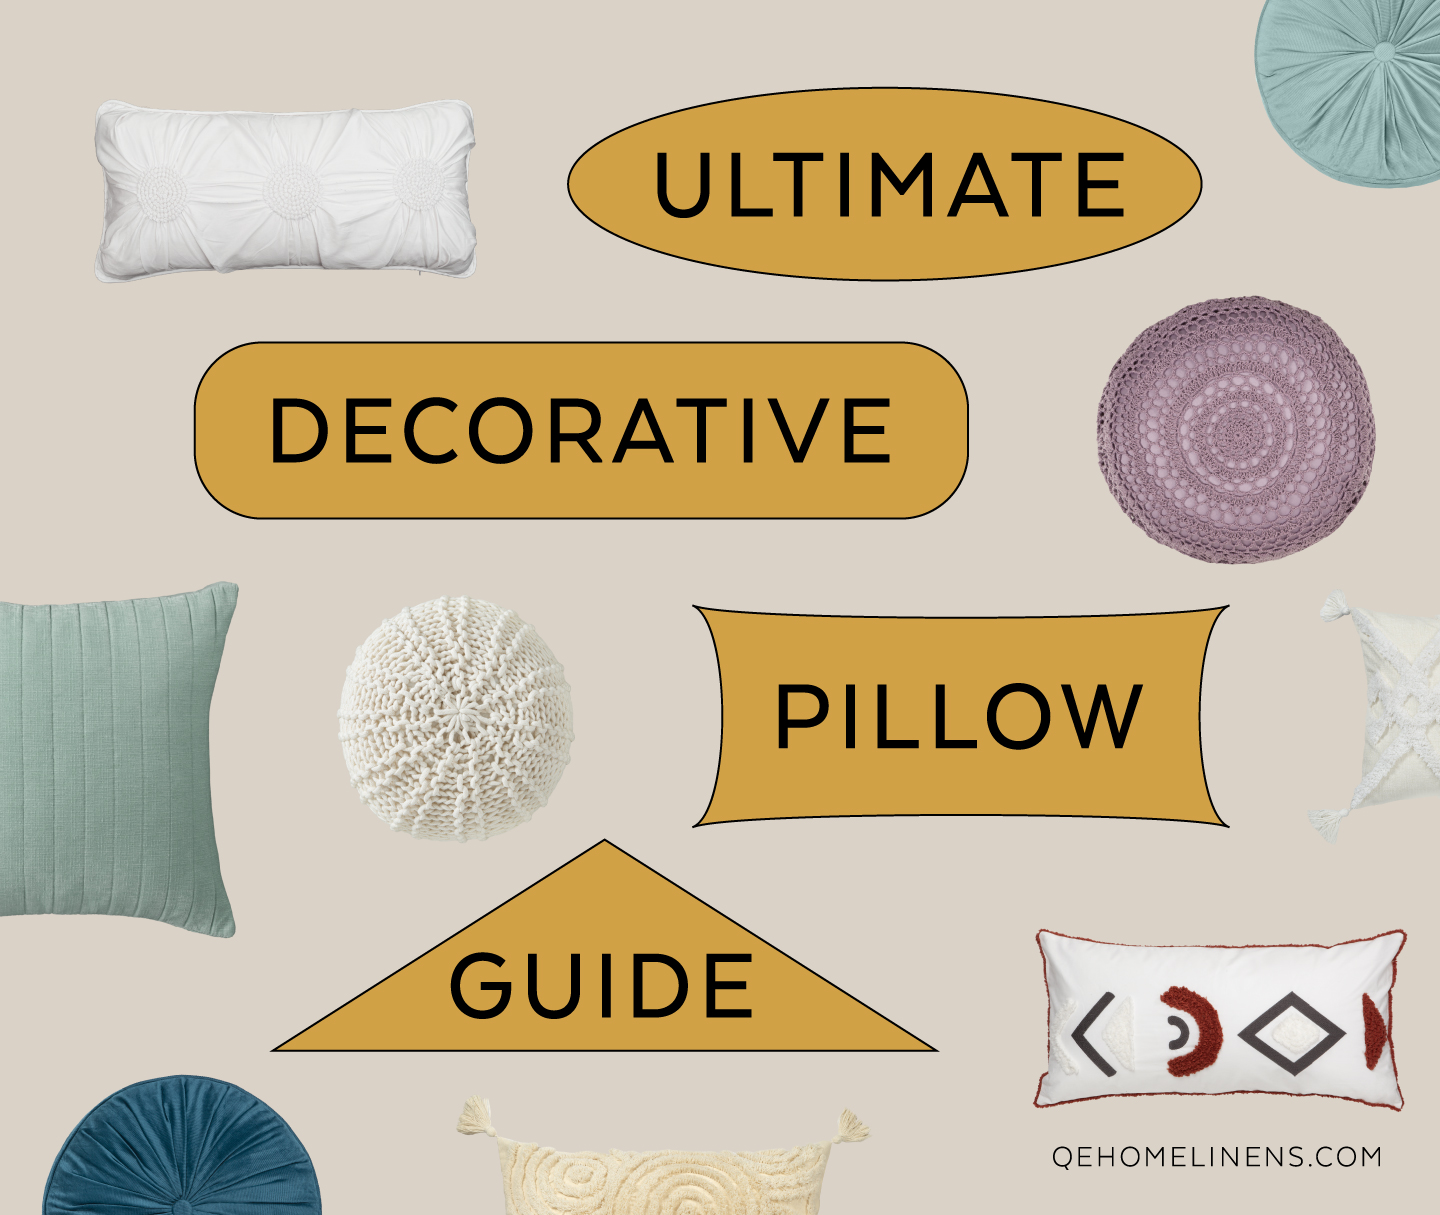 https://www.qehomelinens.com/product_images/uploaded_images/ultimate-decorative-pillow-guide-title-card.jpg